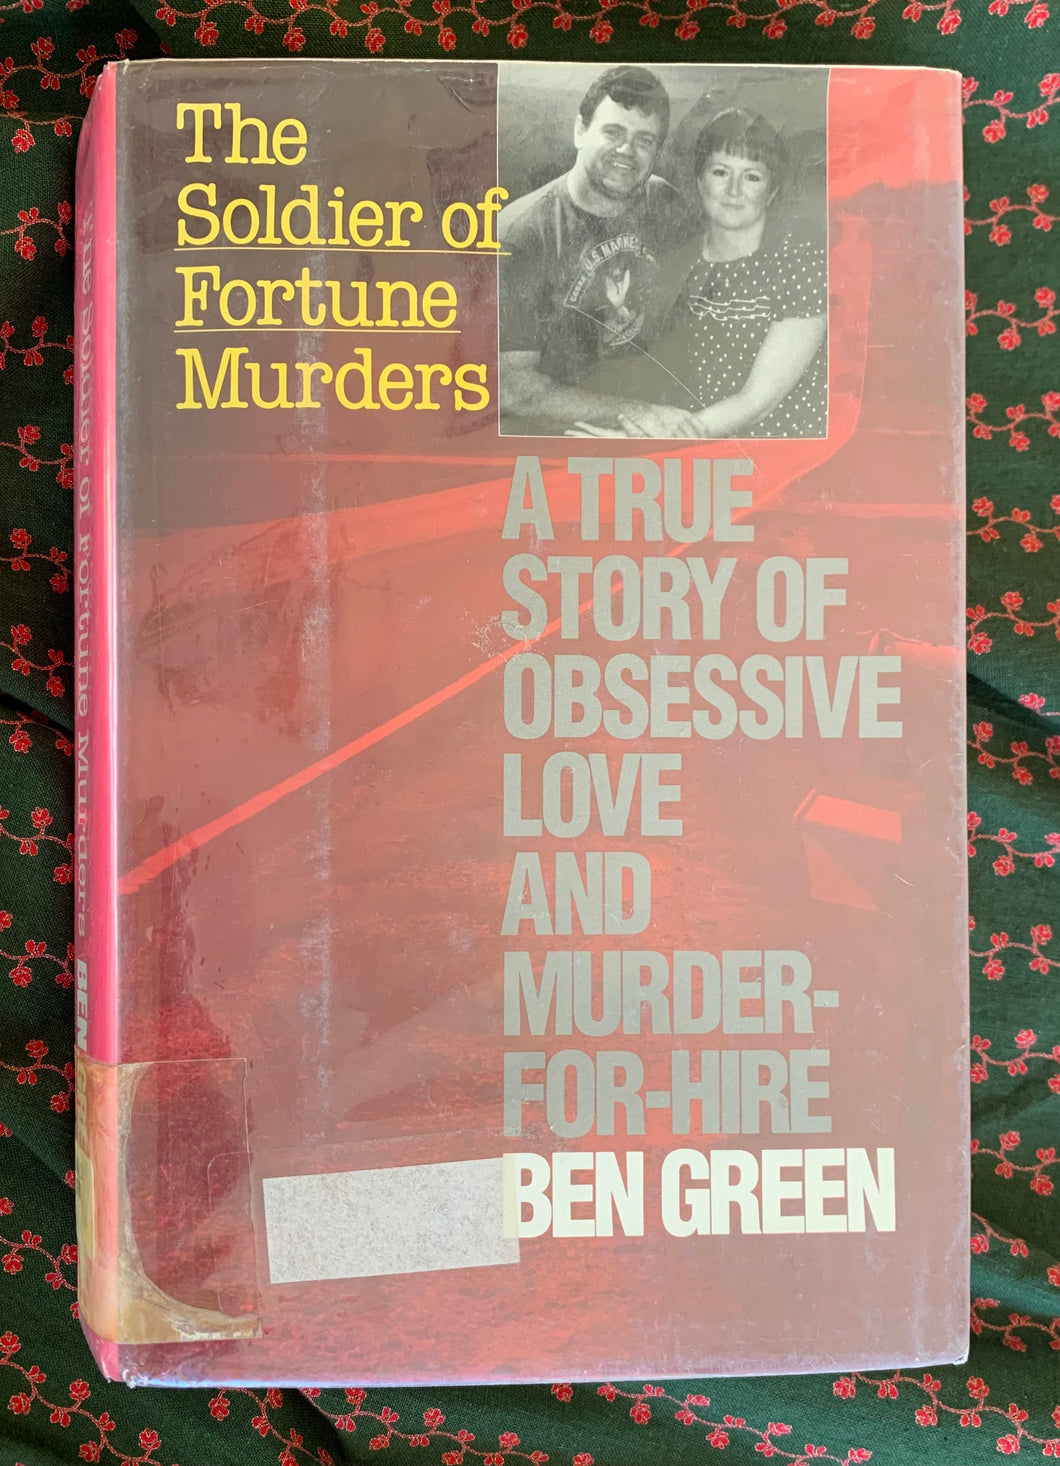 The Soldier of Fortune Murders: A True Story of Obsessive Love and Murder-for-Hire